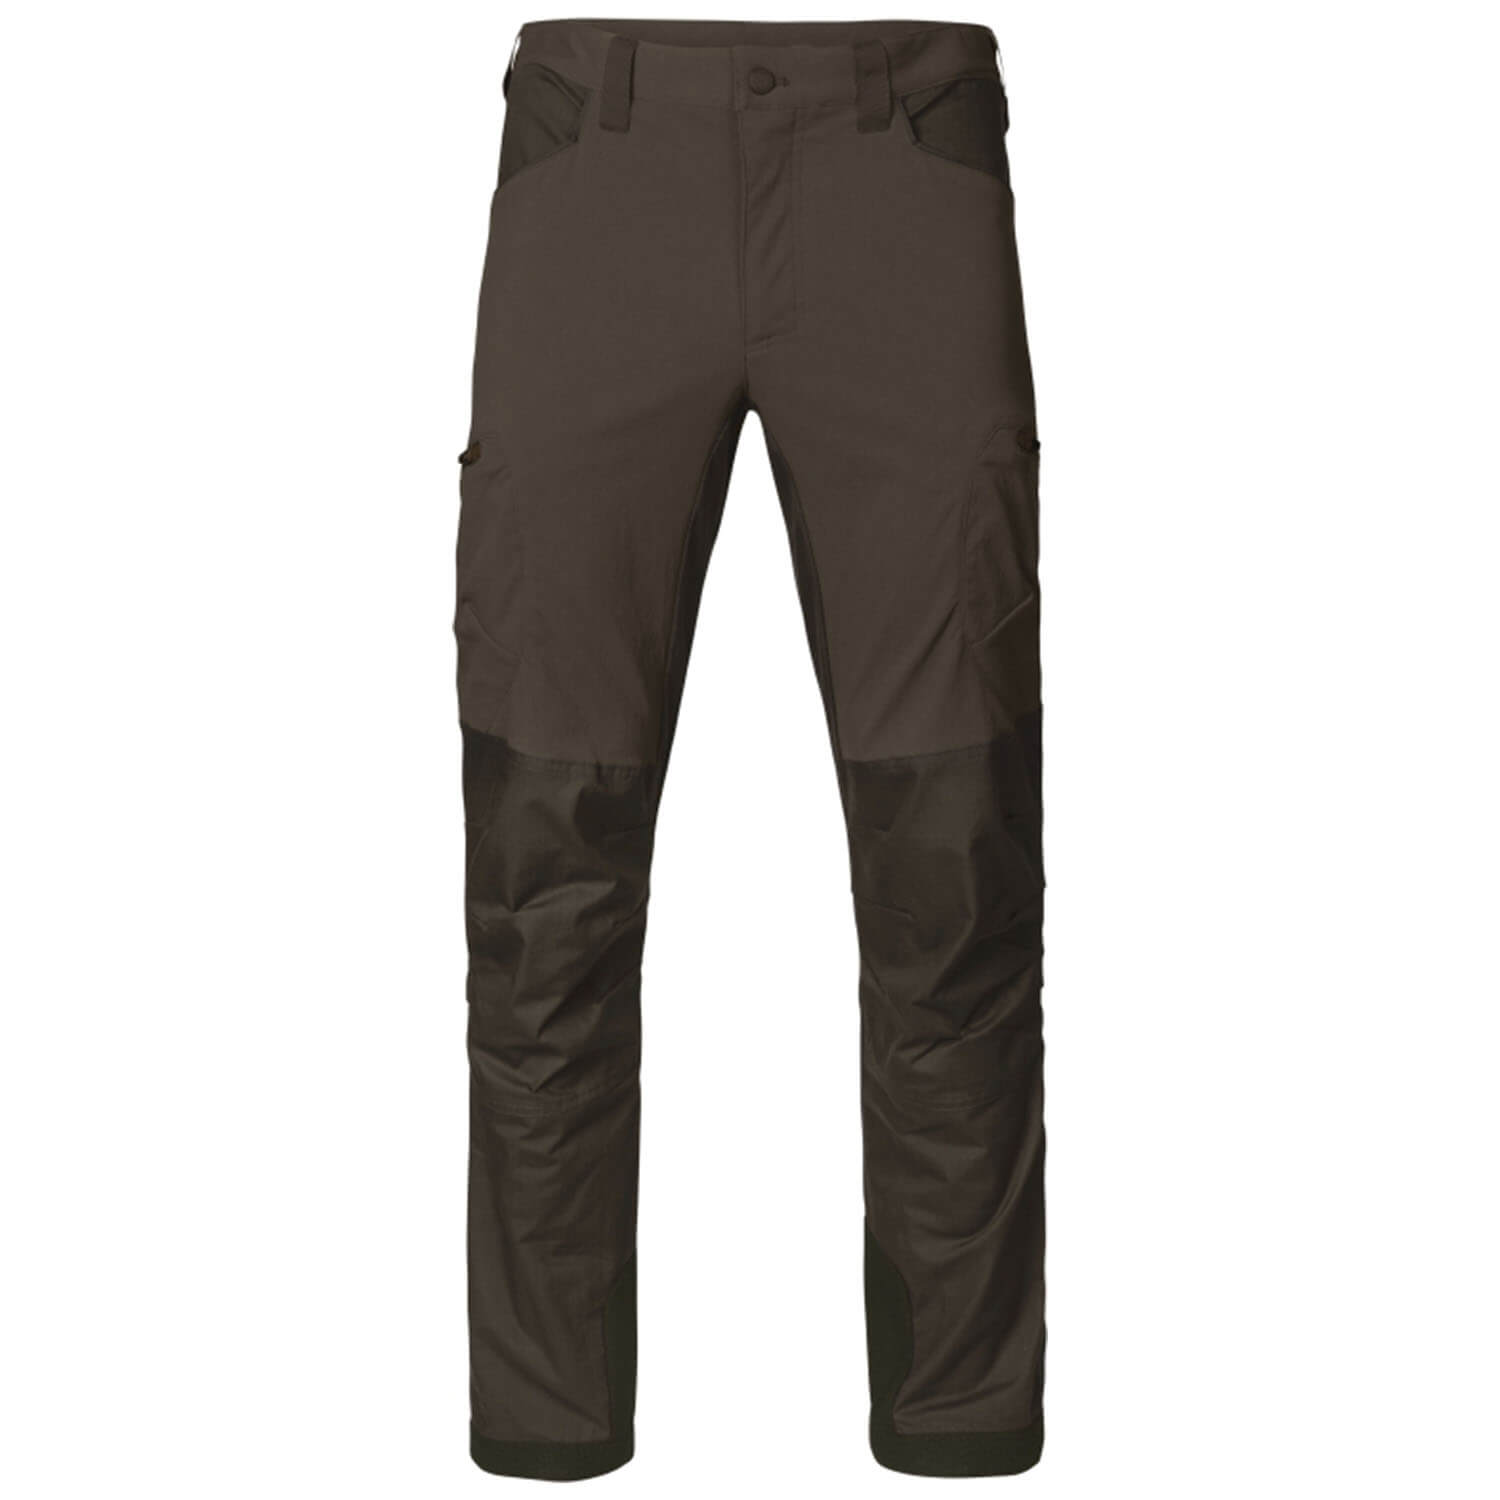 Härkila Ragnar Trousers (Slate Brown/Willow Green) - Hunting Trousers